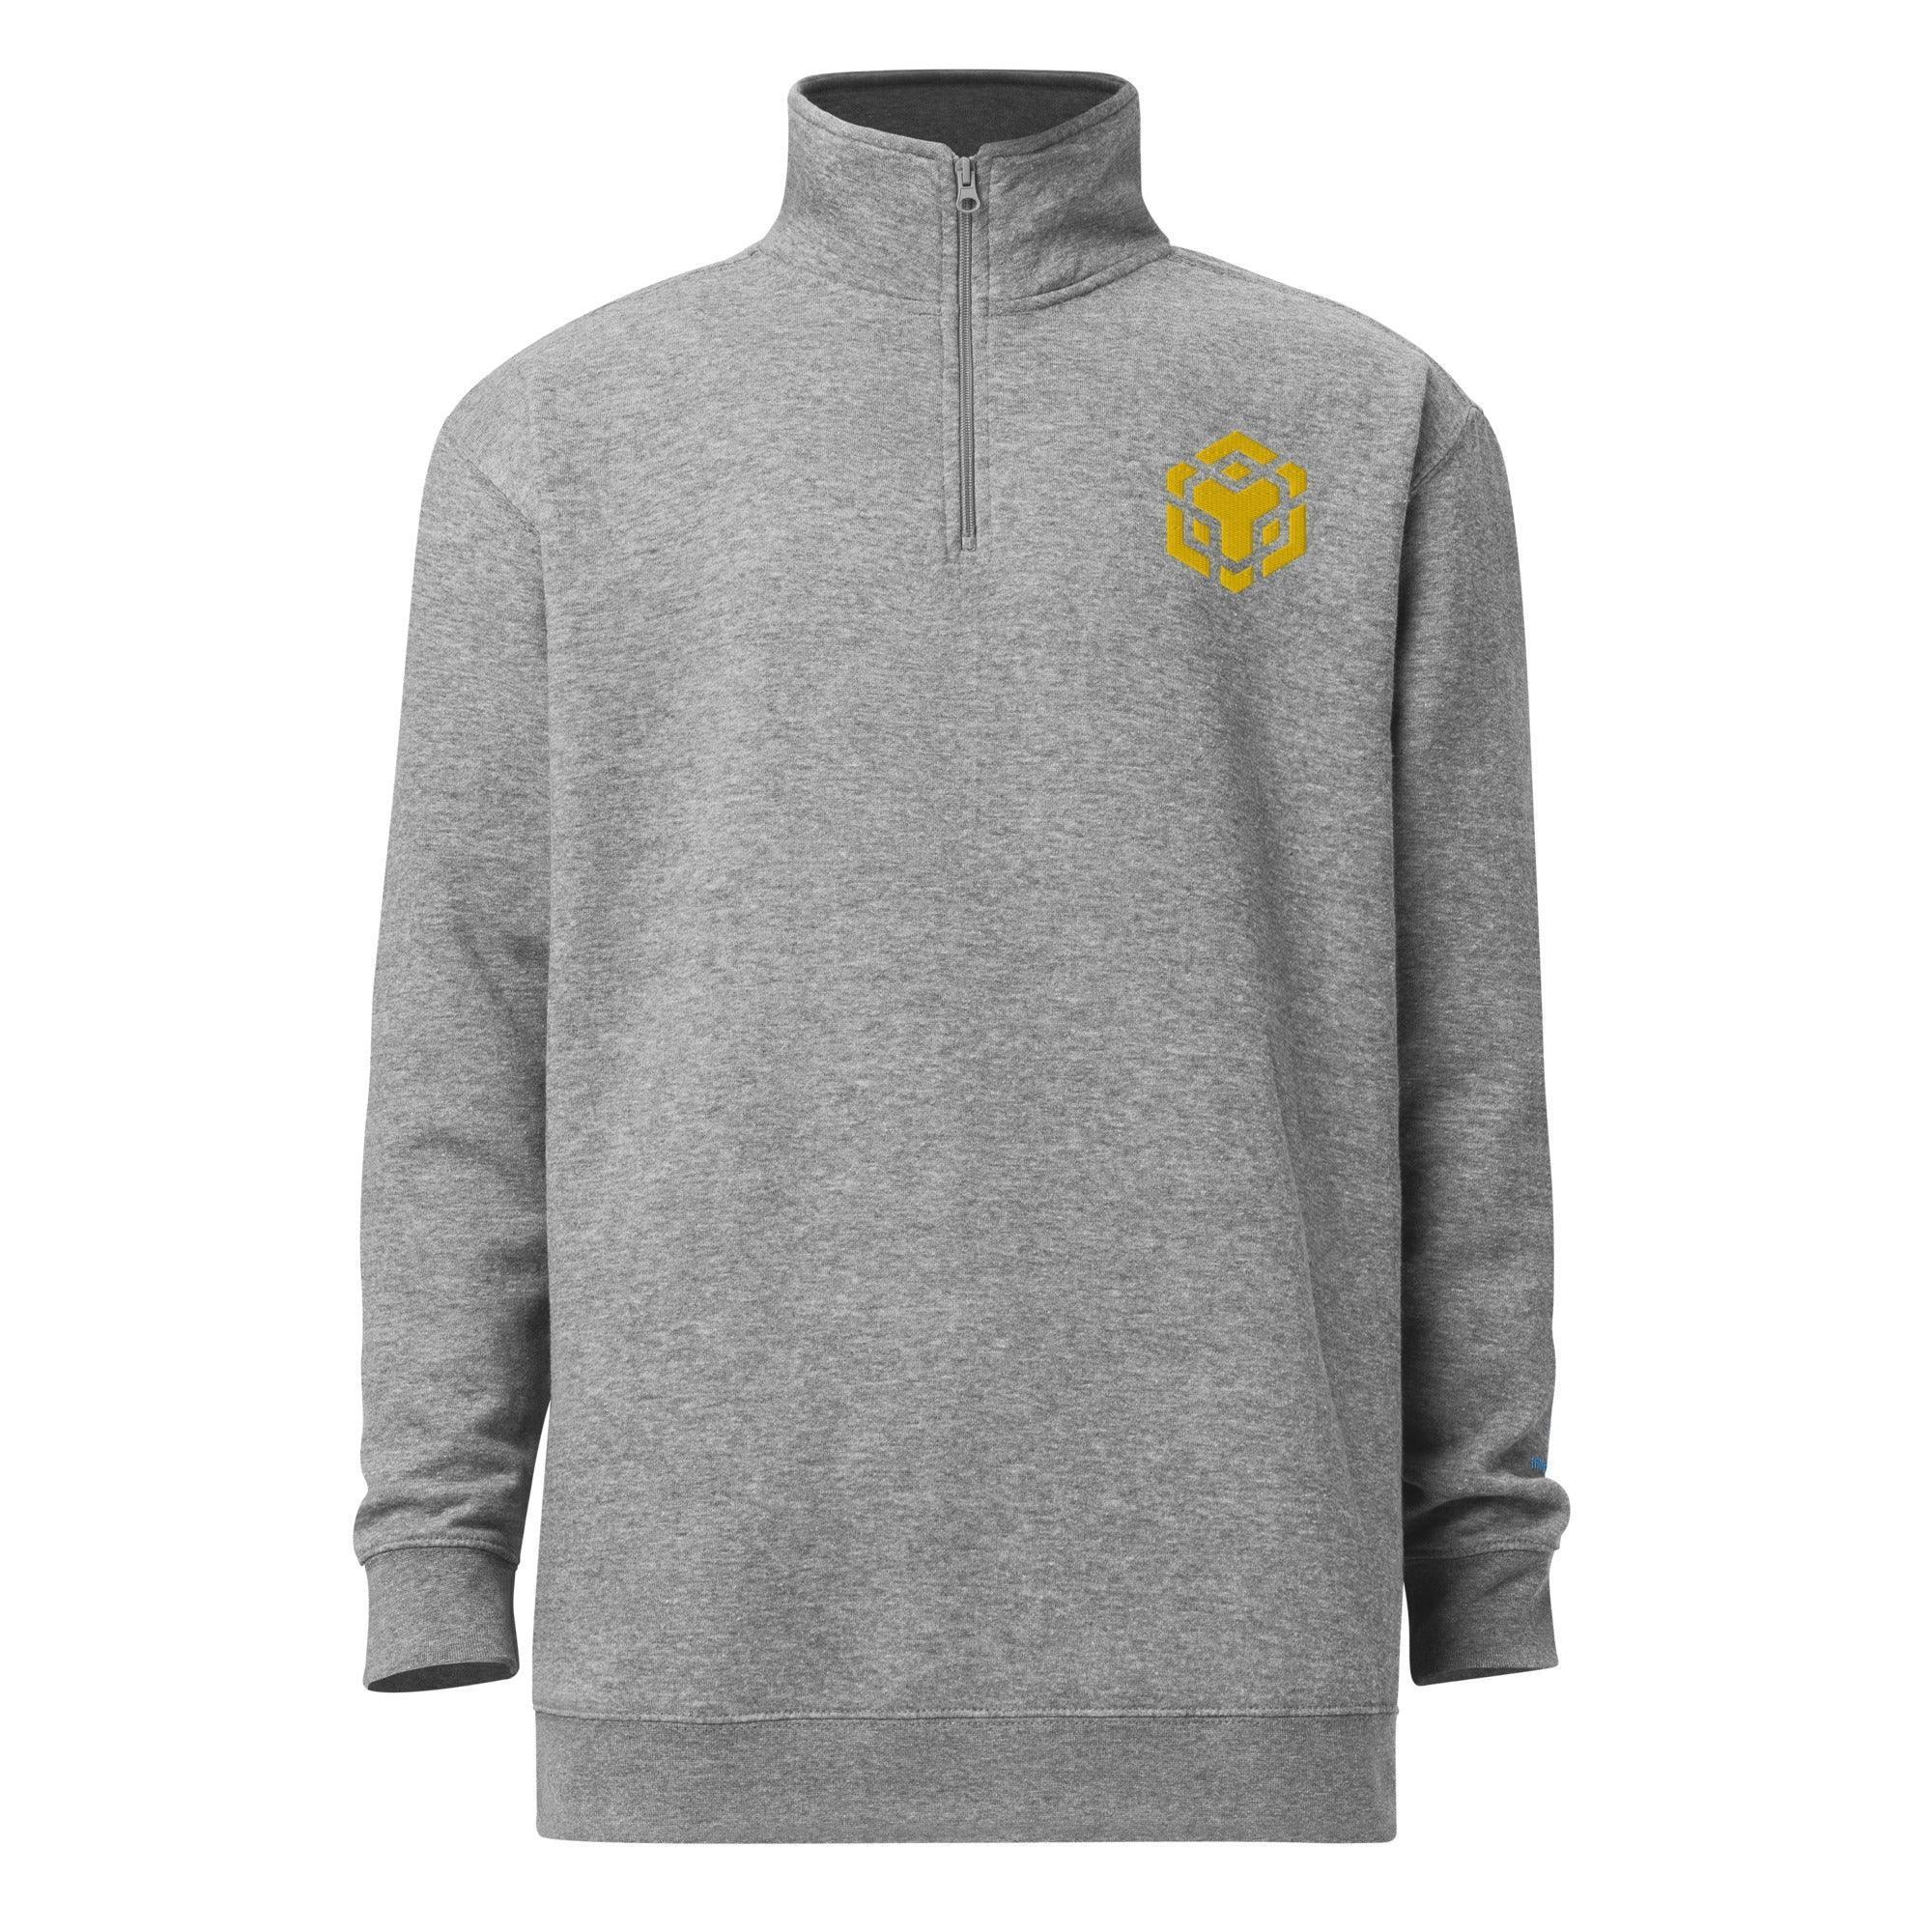 BNB Chain Fleece Pullover - InvestmenTees